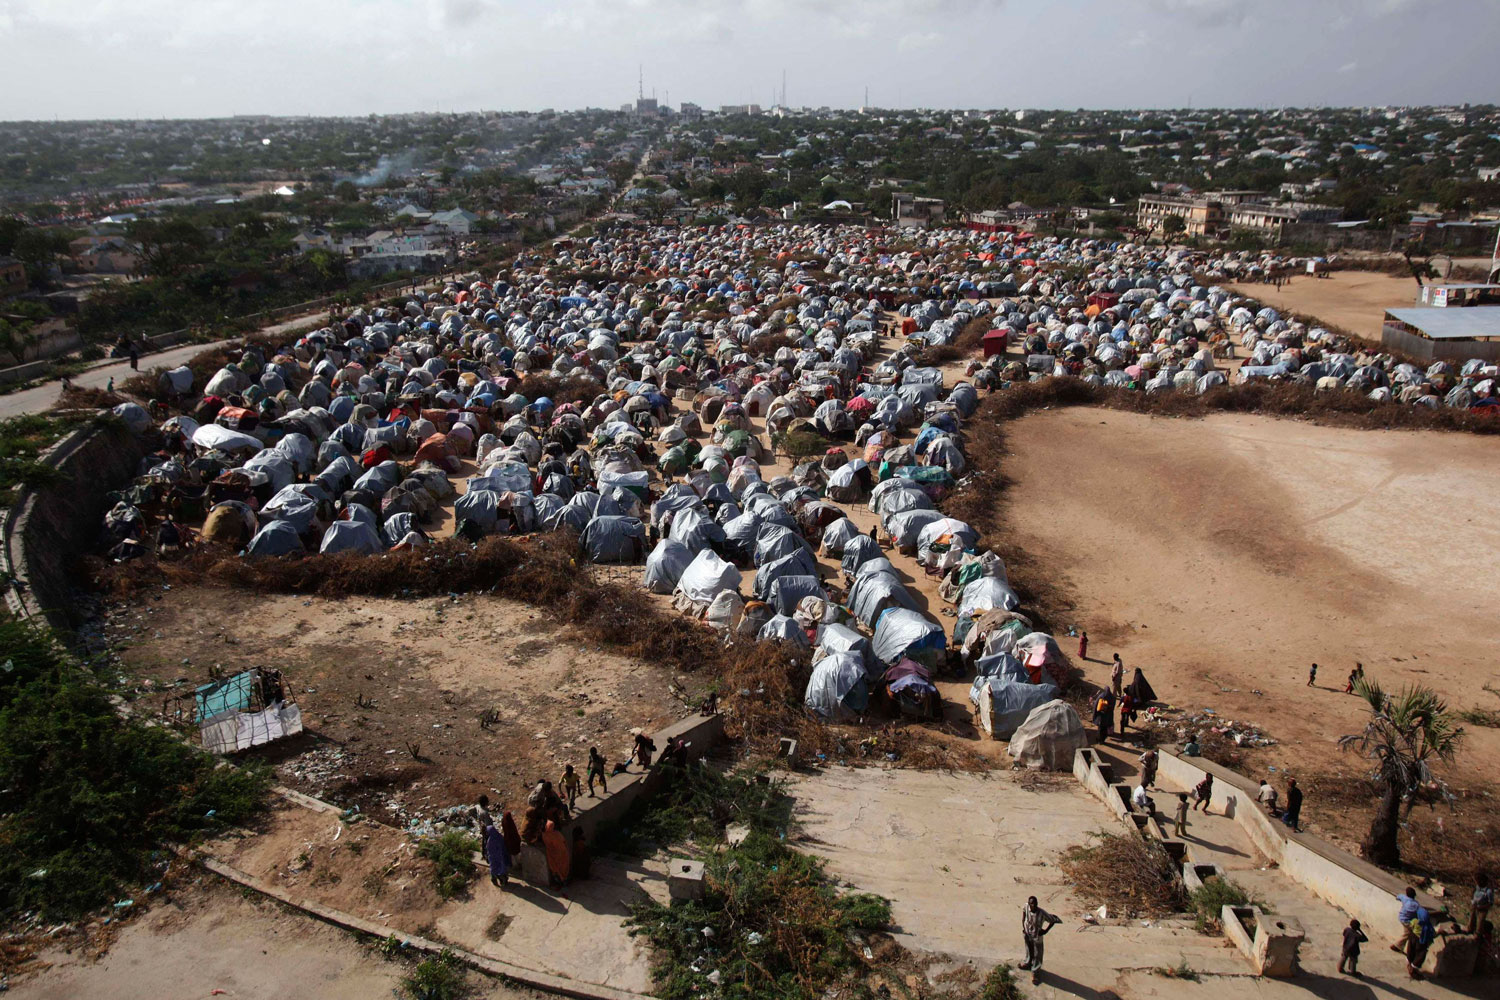 August 24, 2011. An aerial view of Seyidka, a camp for internally displaced people (IDP) in Berkulan, close to the capital of Mogadishu, Somalia.